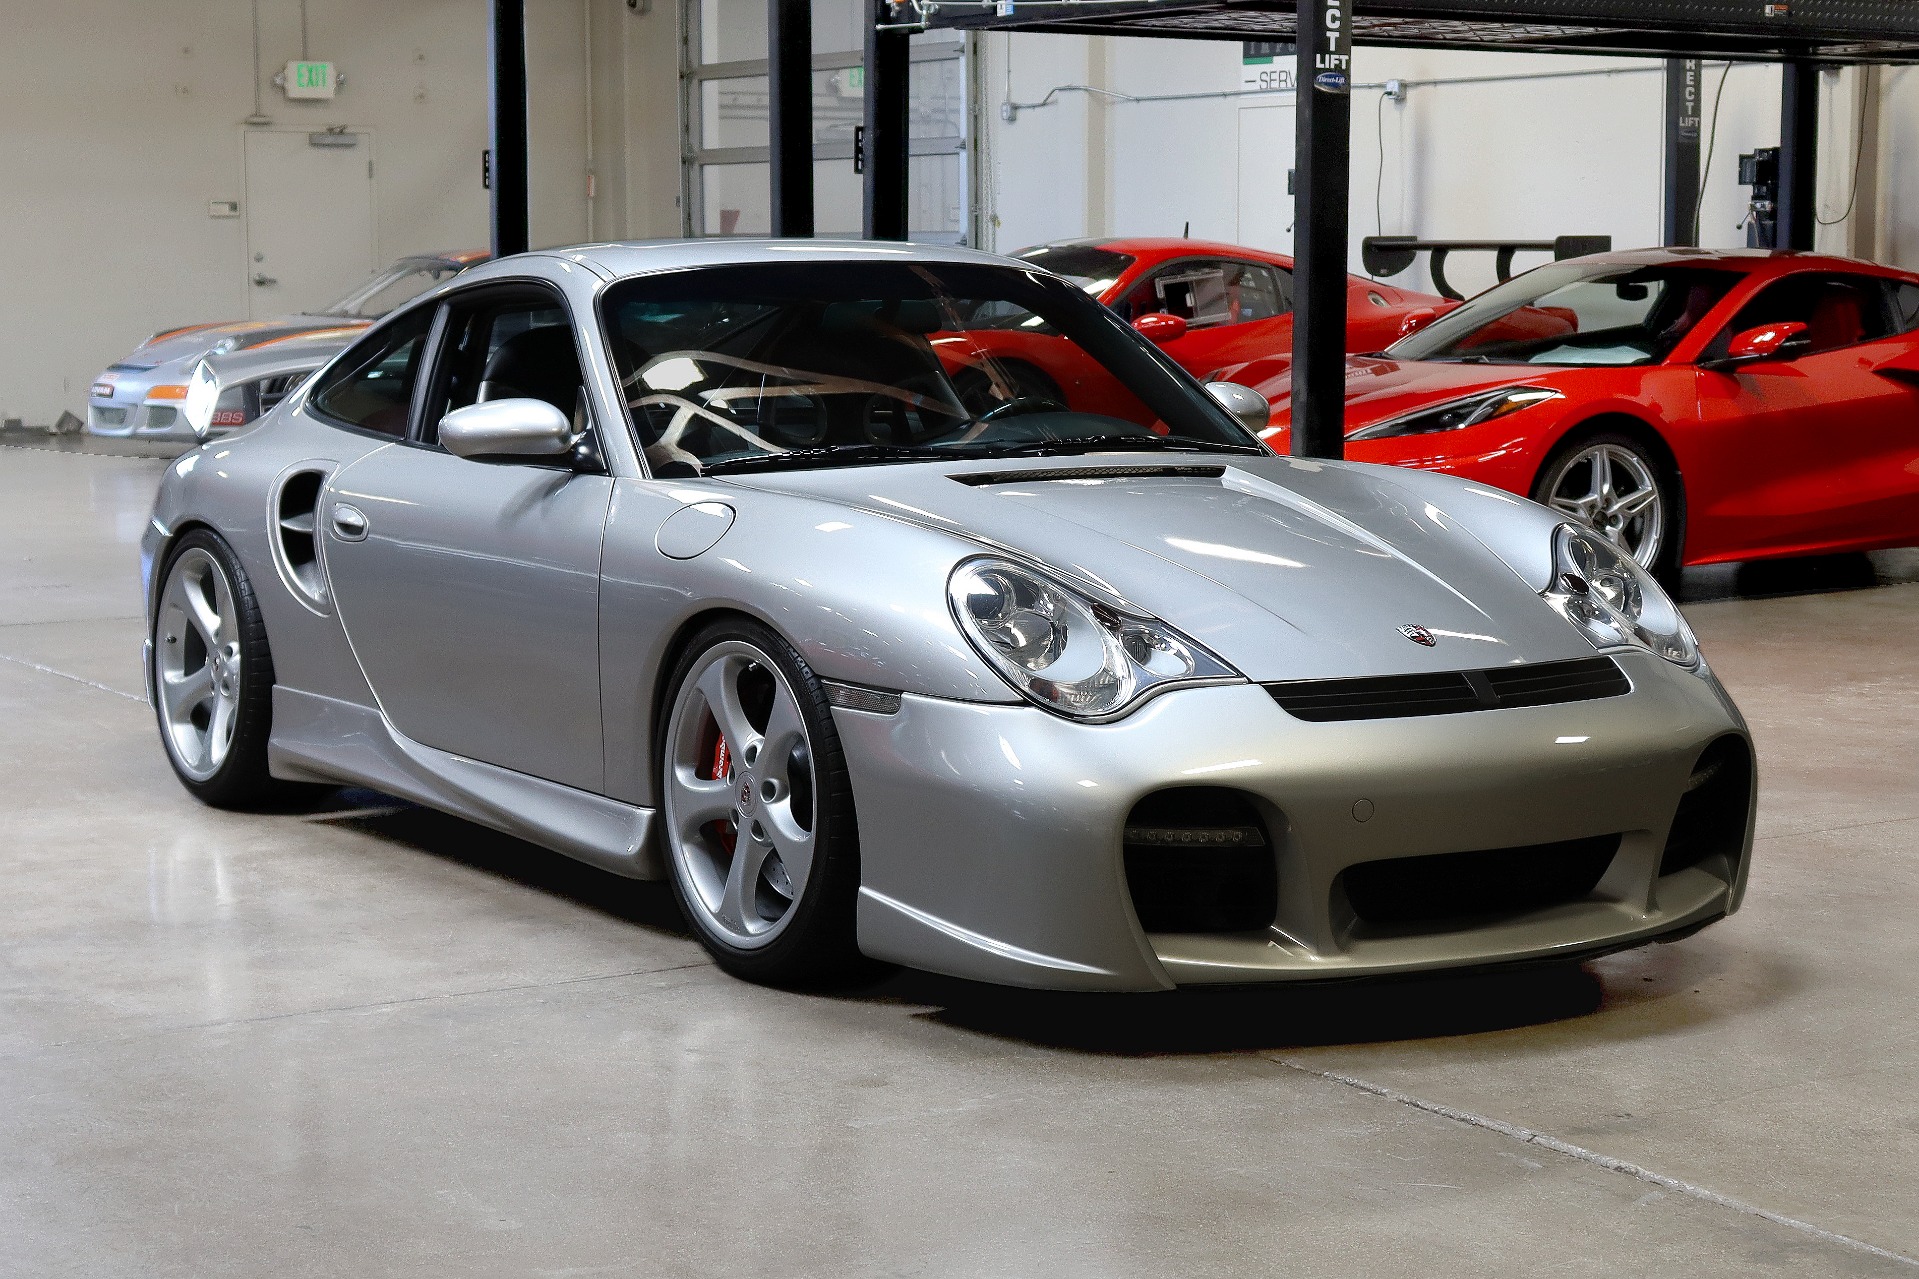 Used 2001 Porsche 911 turbo Turbo for sale $104,995 at San Francisco Sports Cars in San Carlos CA 94070 1